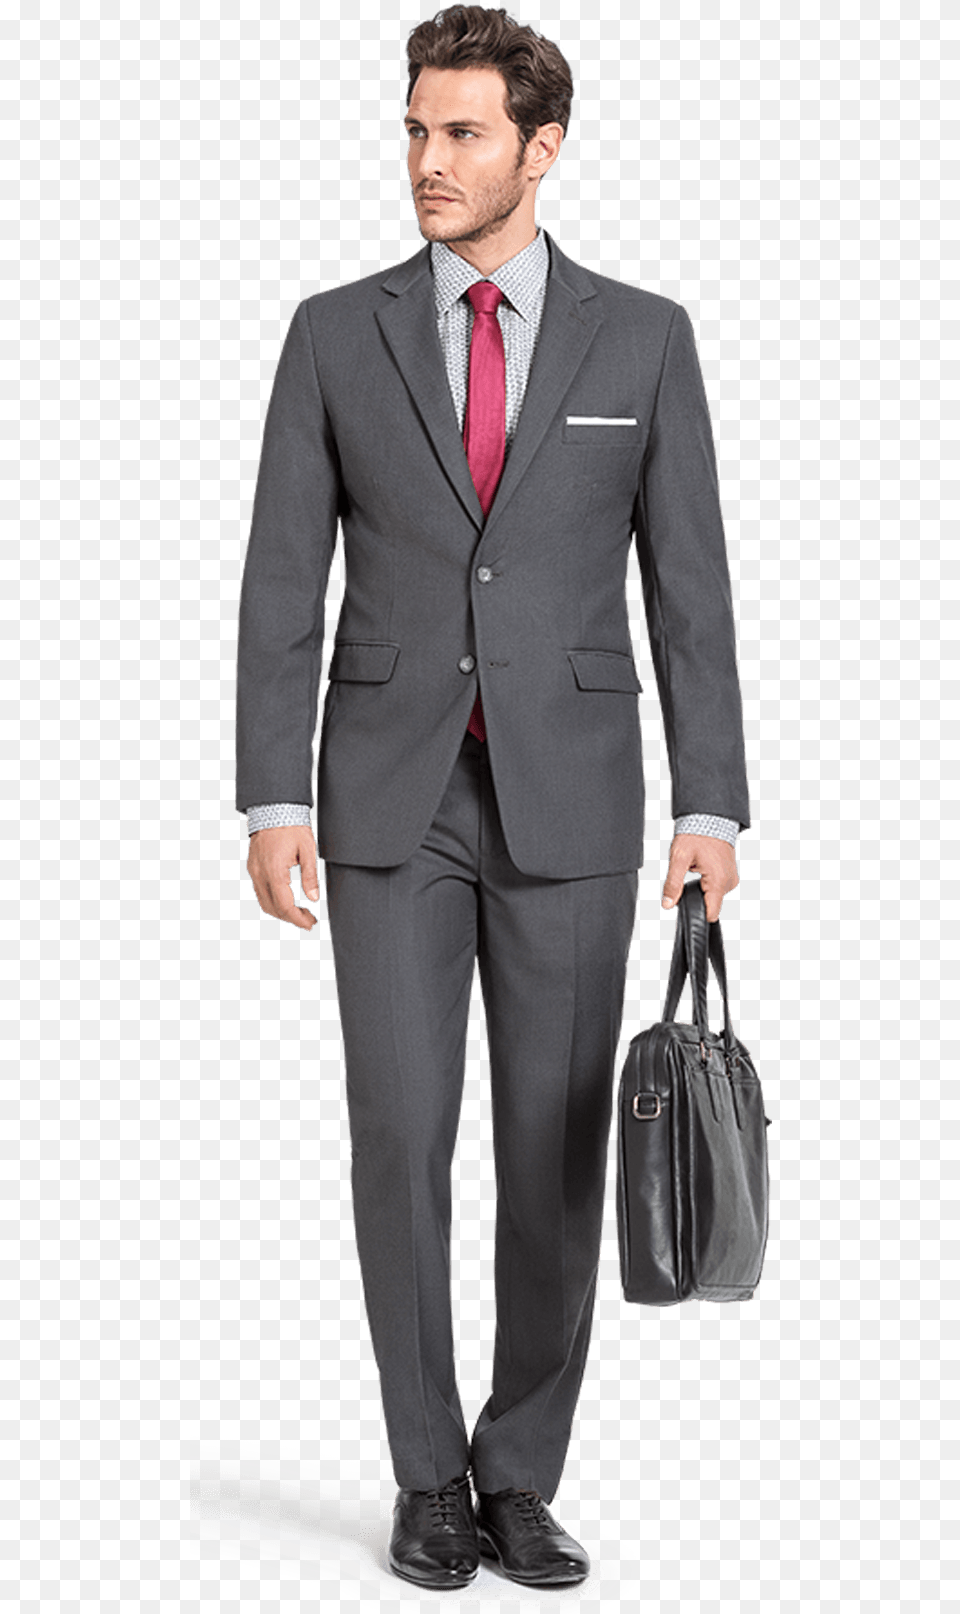 Business Suit Traje Gris Hombre Moreno Hd Coat Pant In, Tuxedo, Clothing, Formal Wear, Bag Free Png